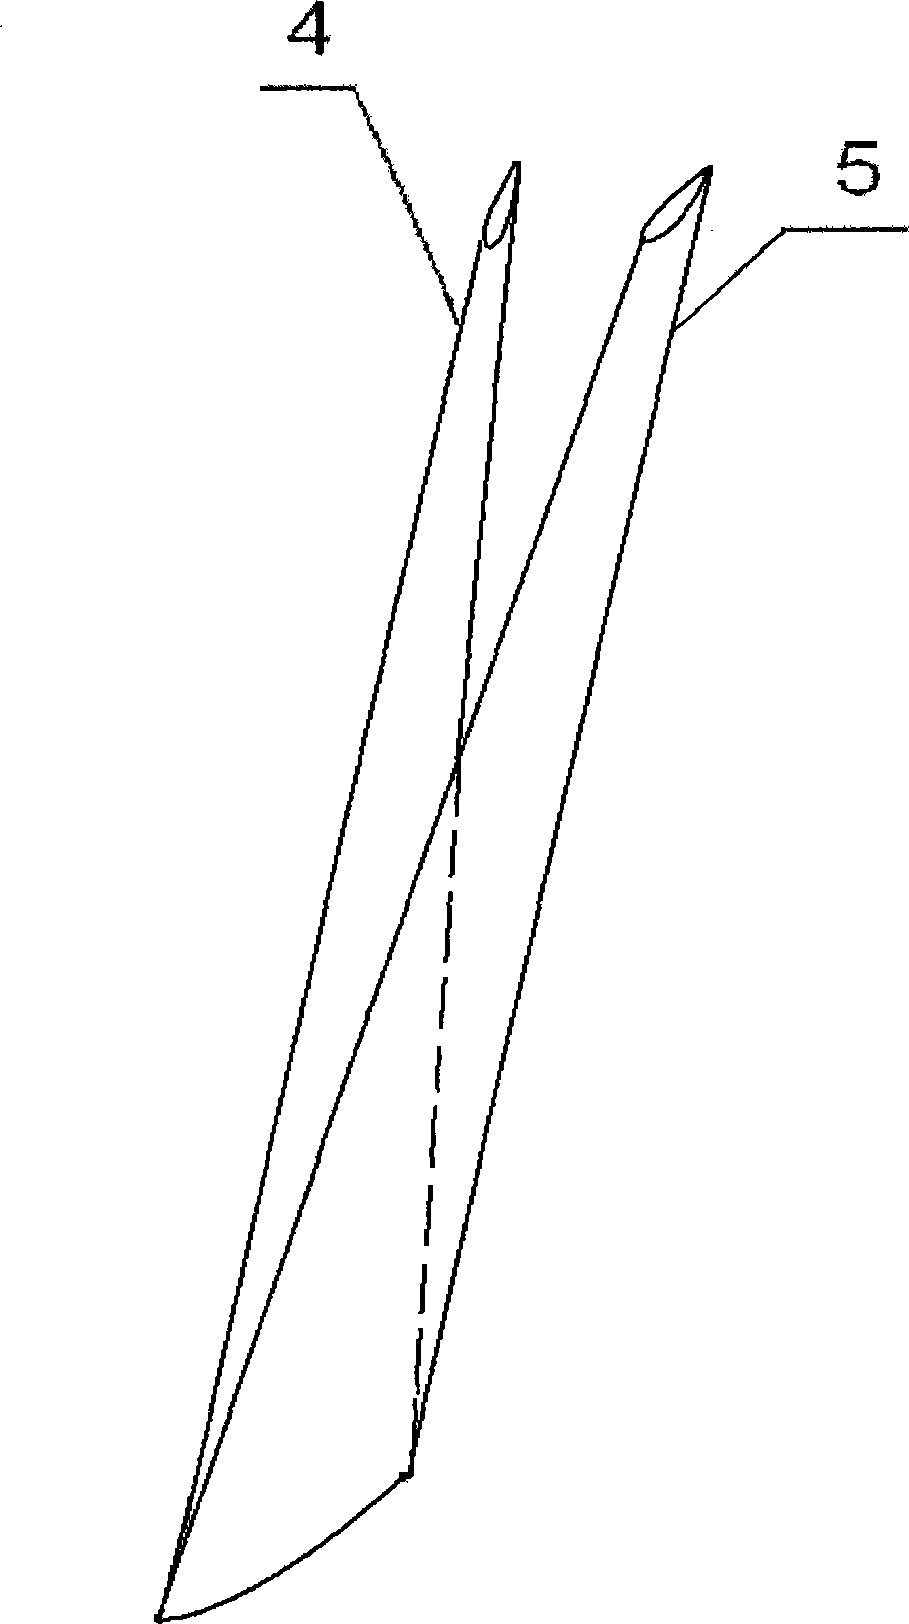 Horizontal axle windmill and method for making wind-powered unit vane